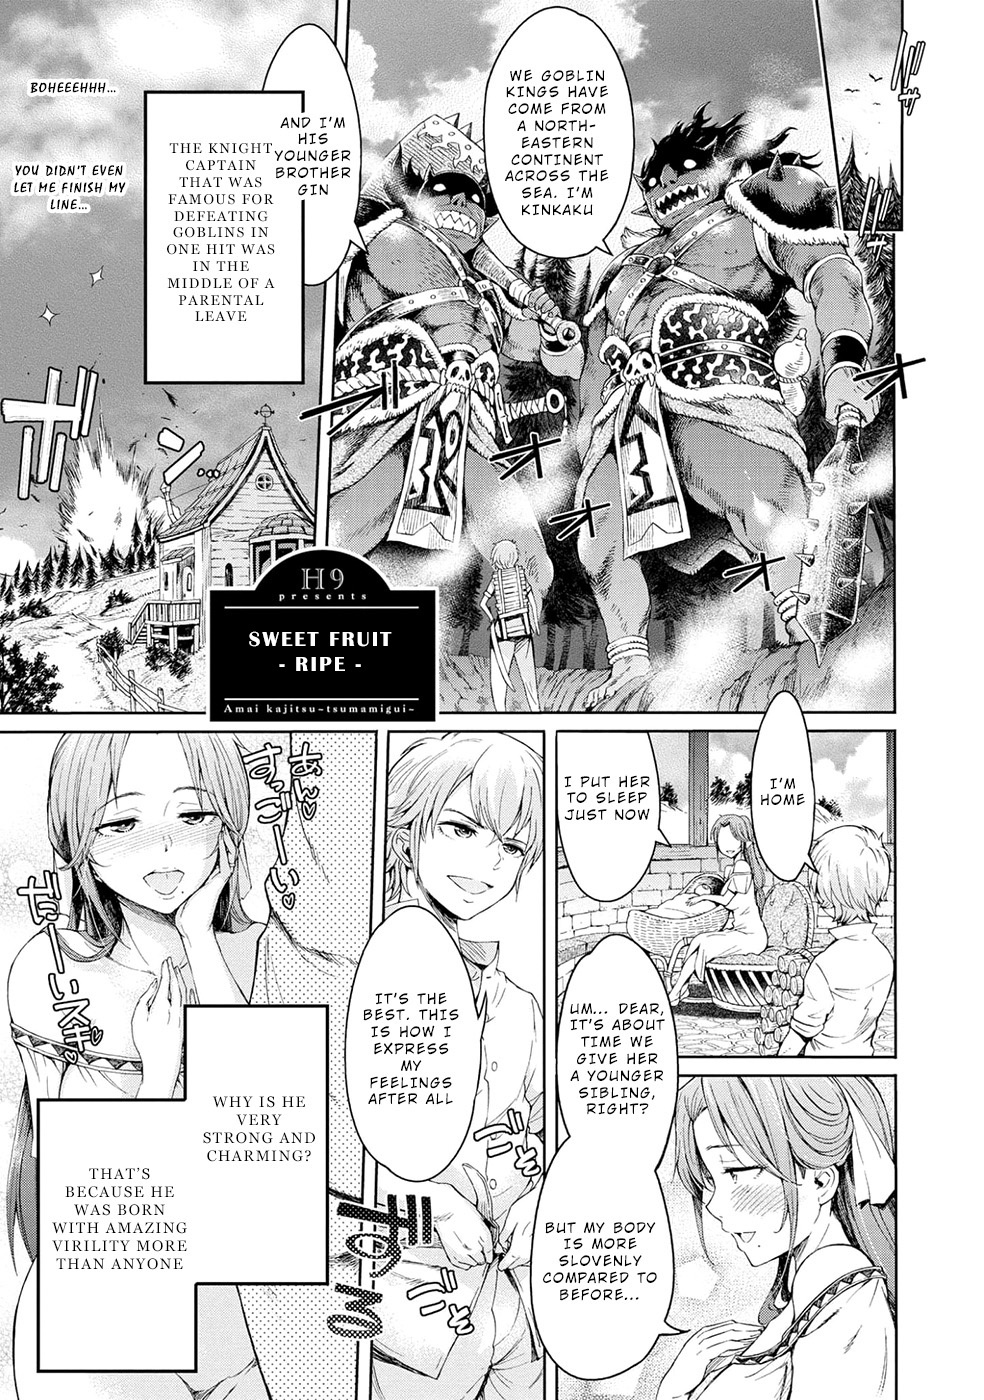 A Female Warrior Who Fell To The Goblin Kingdom Vol.1 Chapter 6: Sweet Fruit -Ripe- - Picture 2